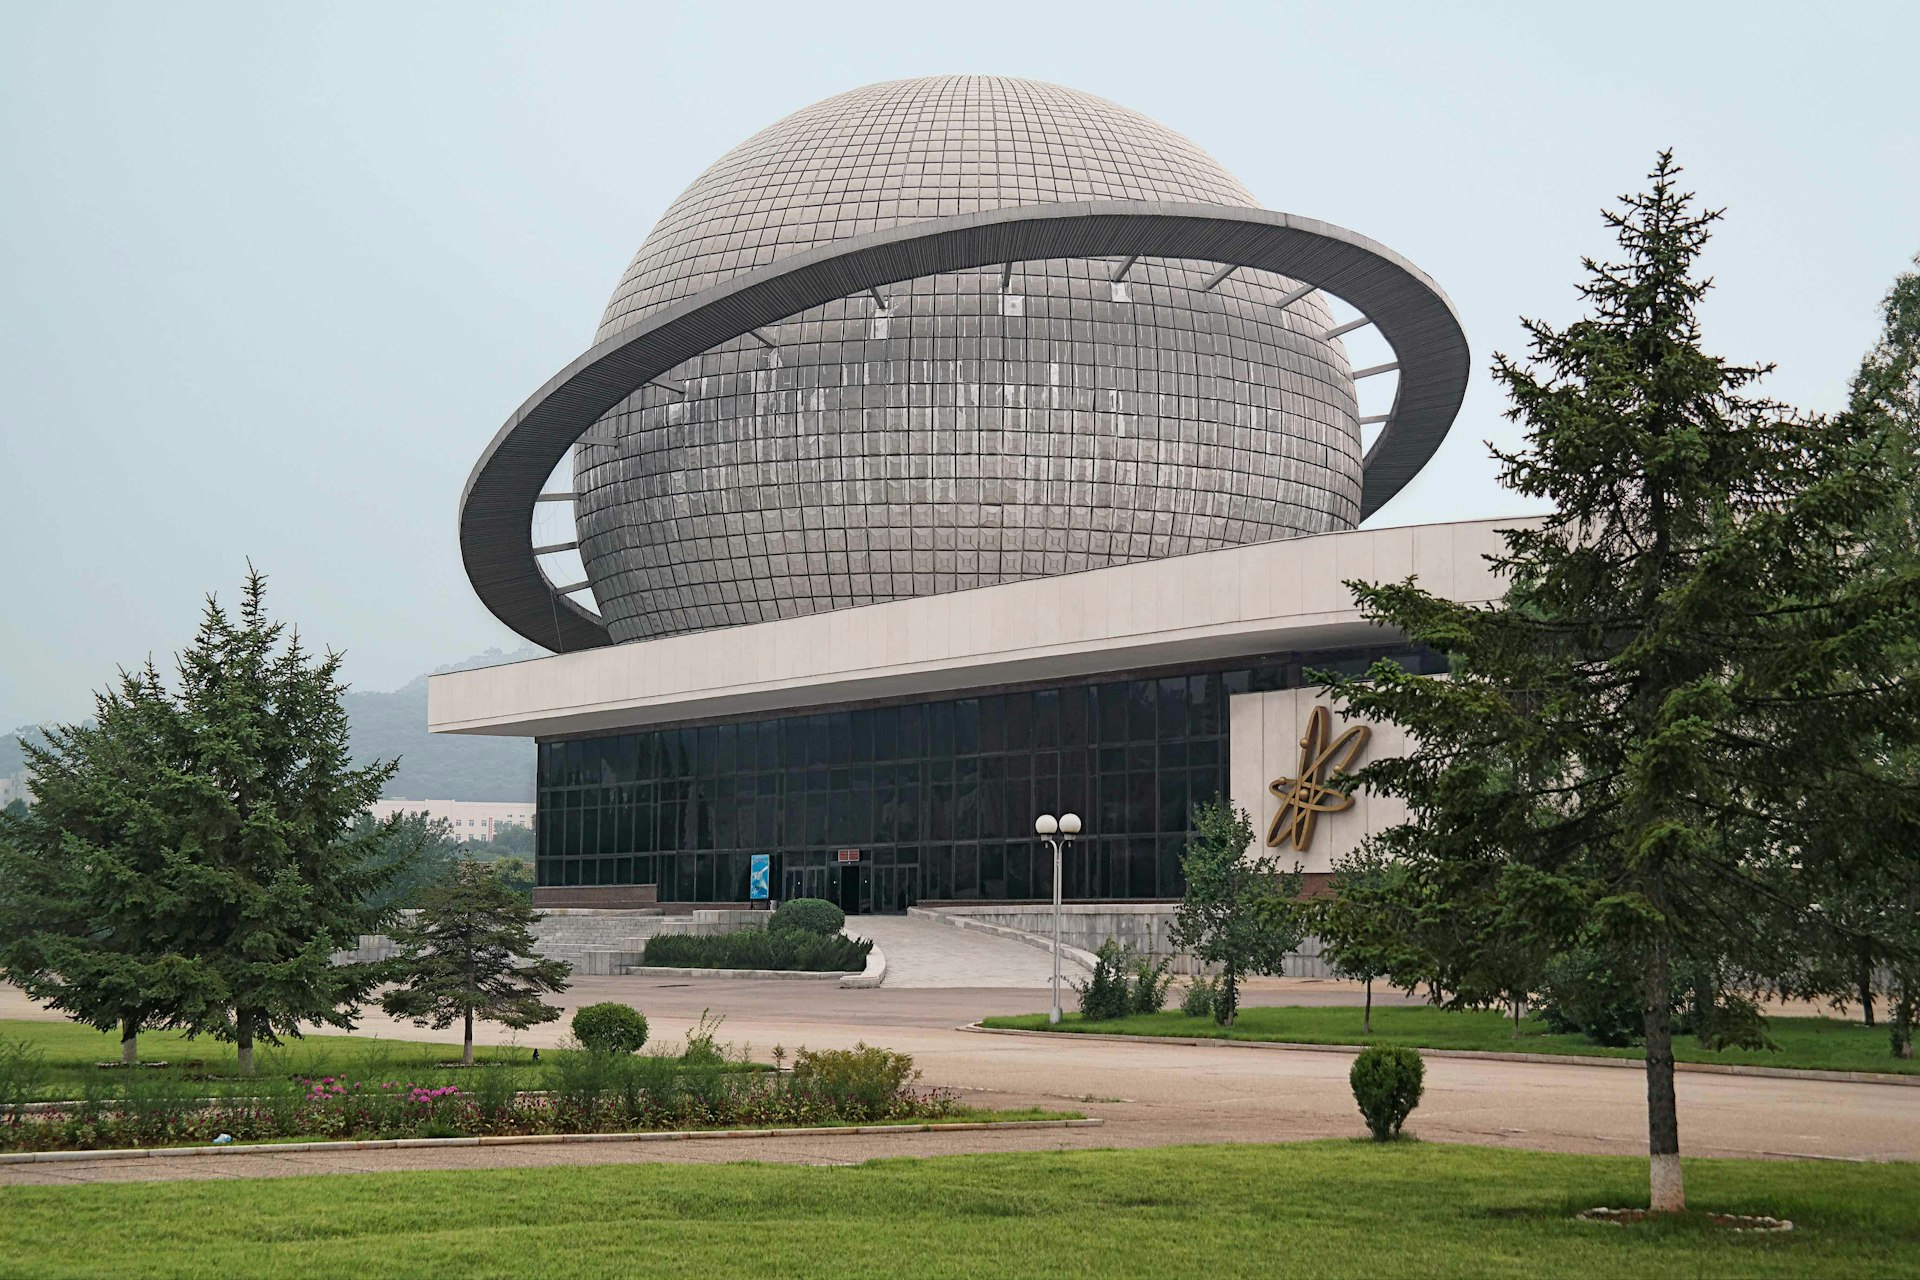 The planetarium forms part of the Three Revolutions Exhibition park, a grand expo campus built in 1992 to showcase the ideological, technological and cultural achievements of North Korea, from heavy industry and mining to agriculture and electronics. The Three Revolutions movement started in 1973, when Party activists went around the country campaigning “to raise the ideological level of the people, equip the economy with modern techniques and to lift the people’s technological and cultural level.”